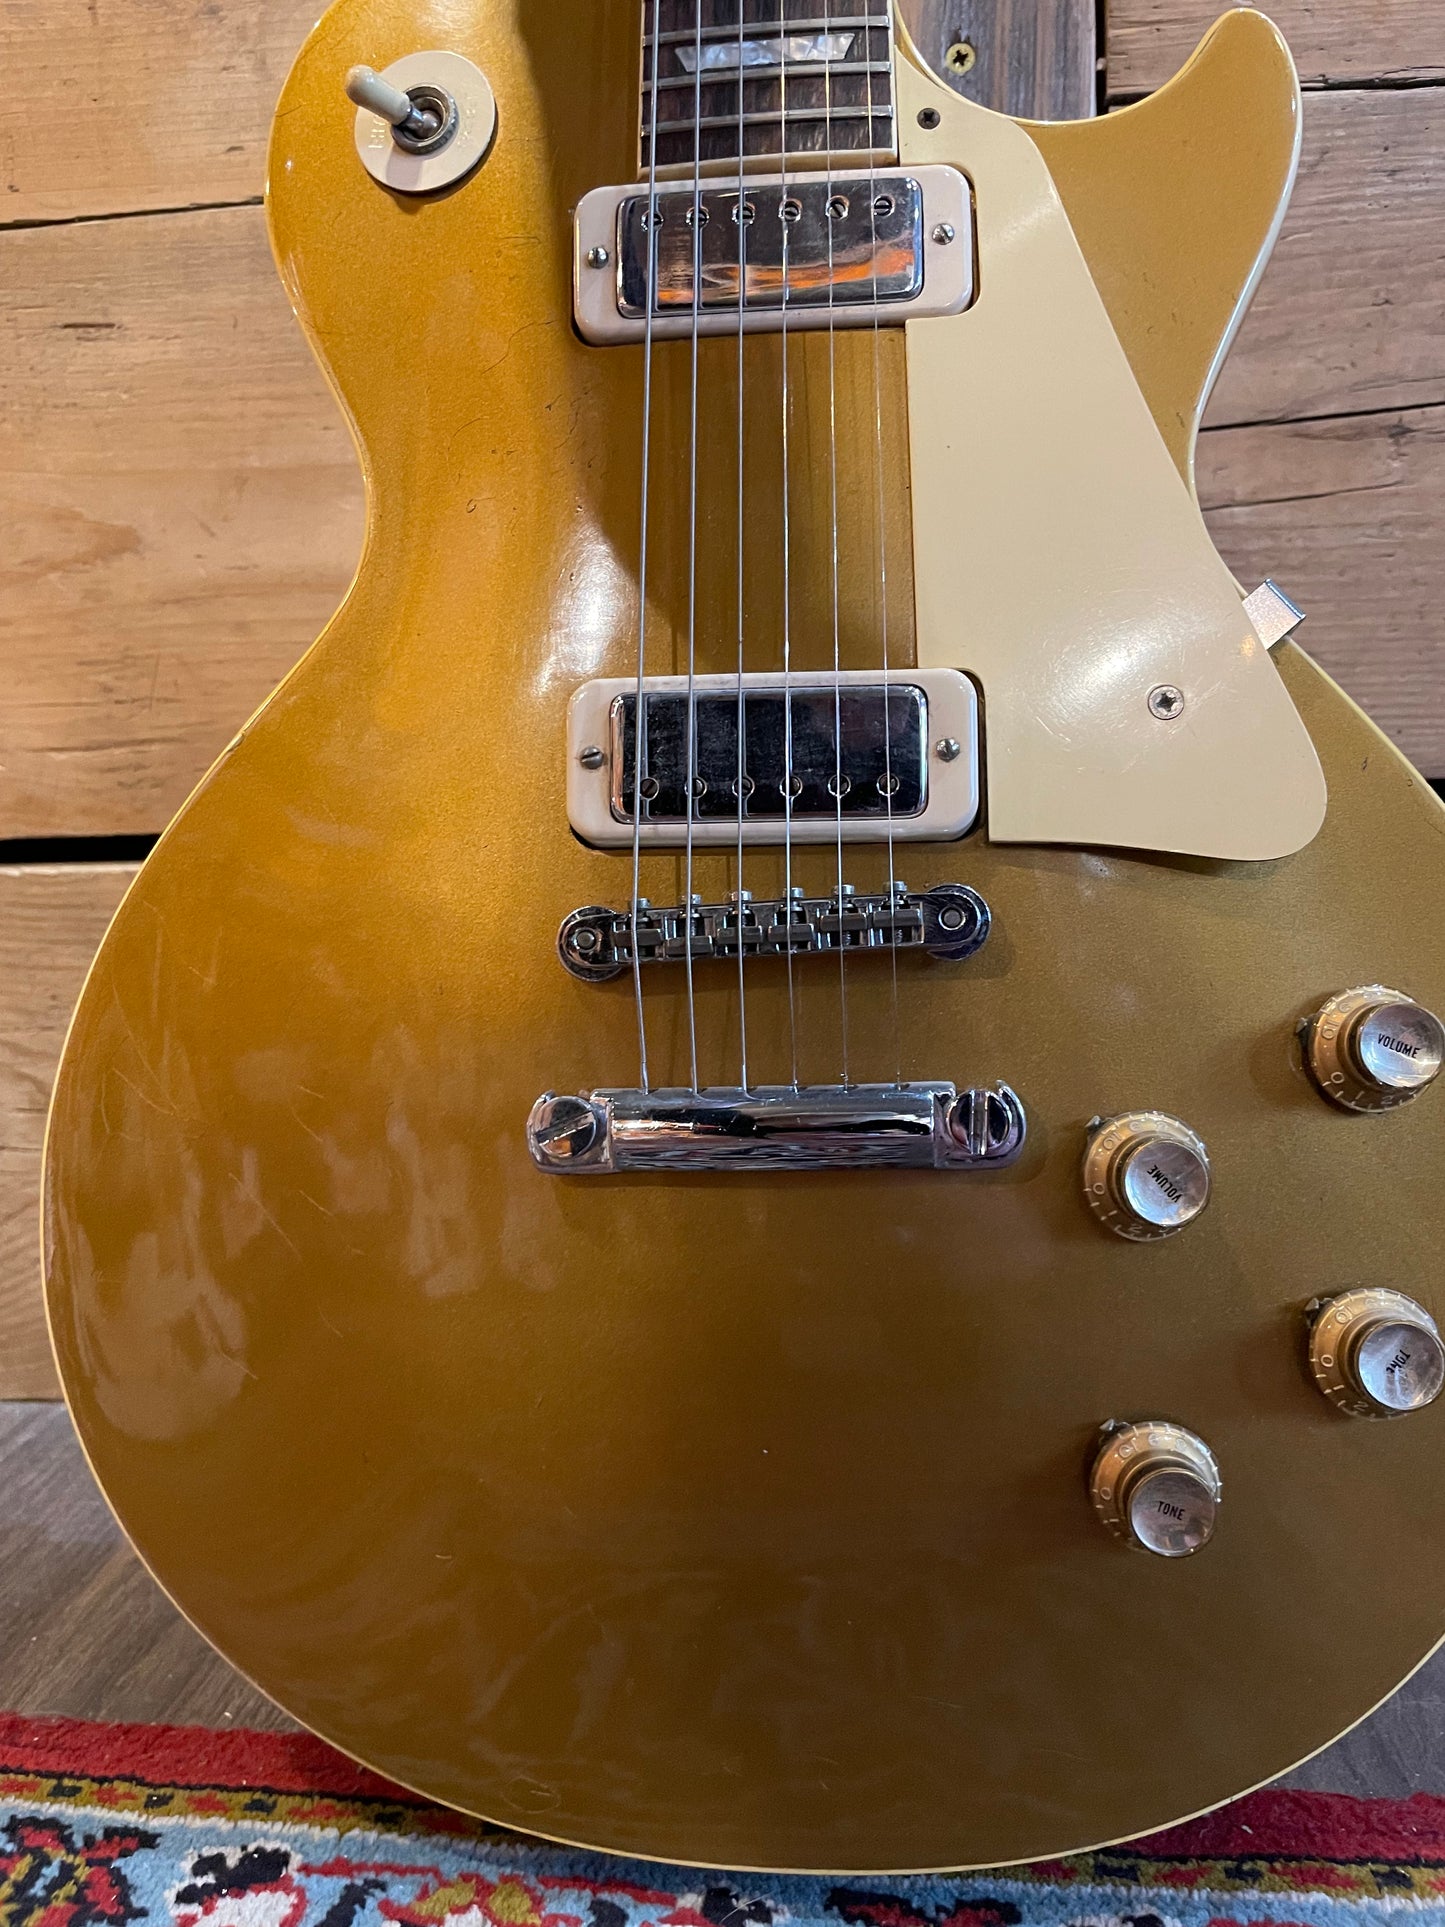 1971 Gibson Les Paul Deluxe, Gold Top